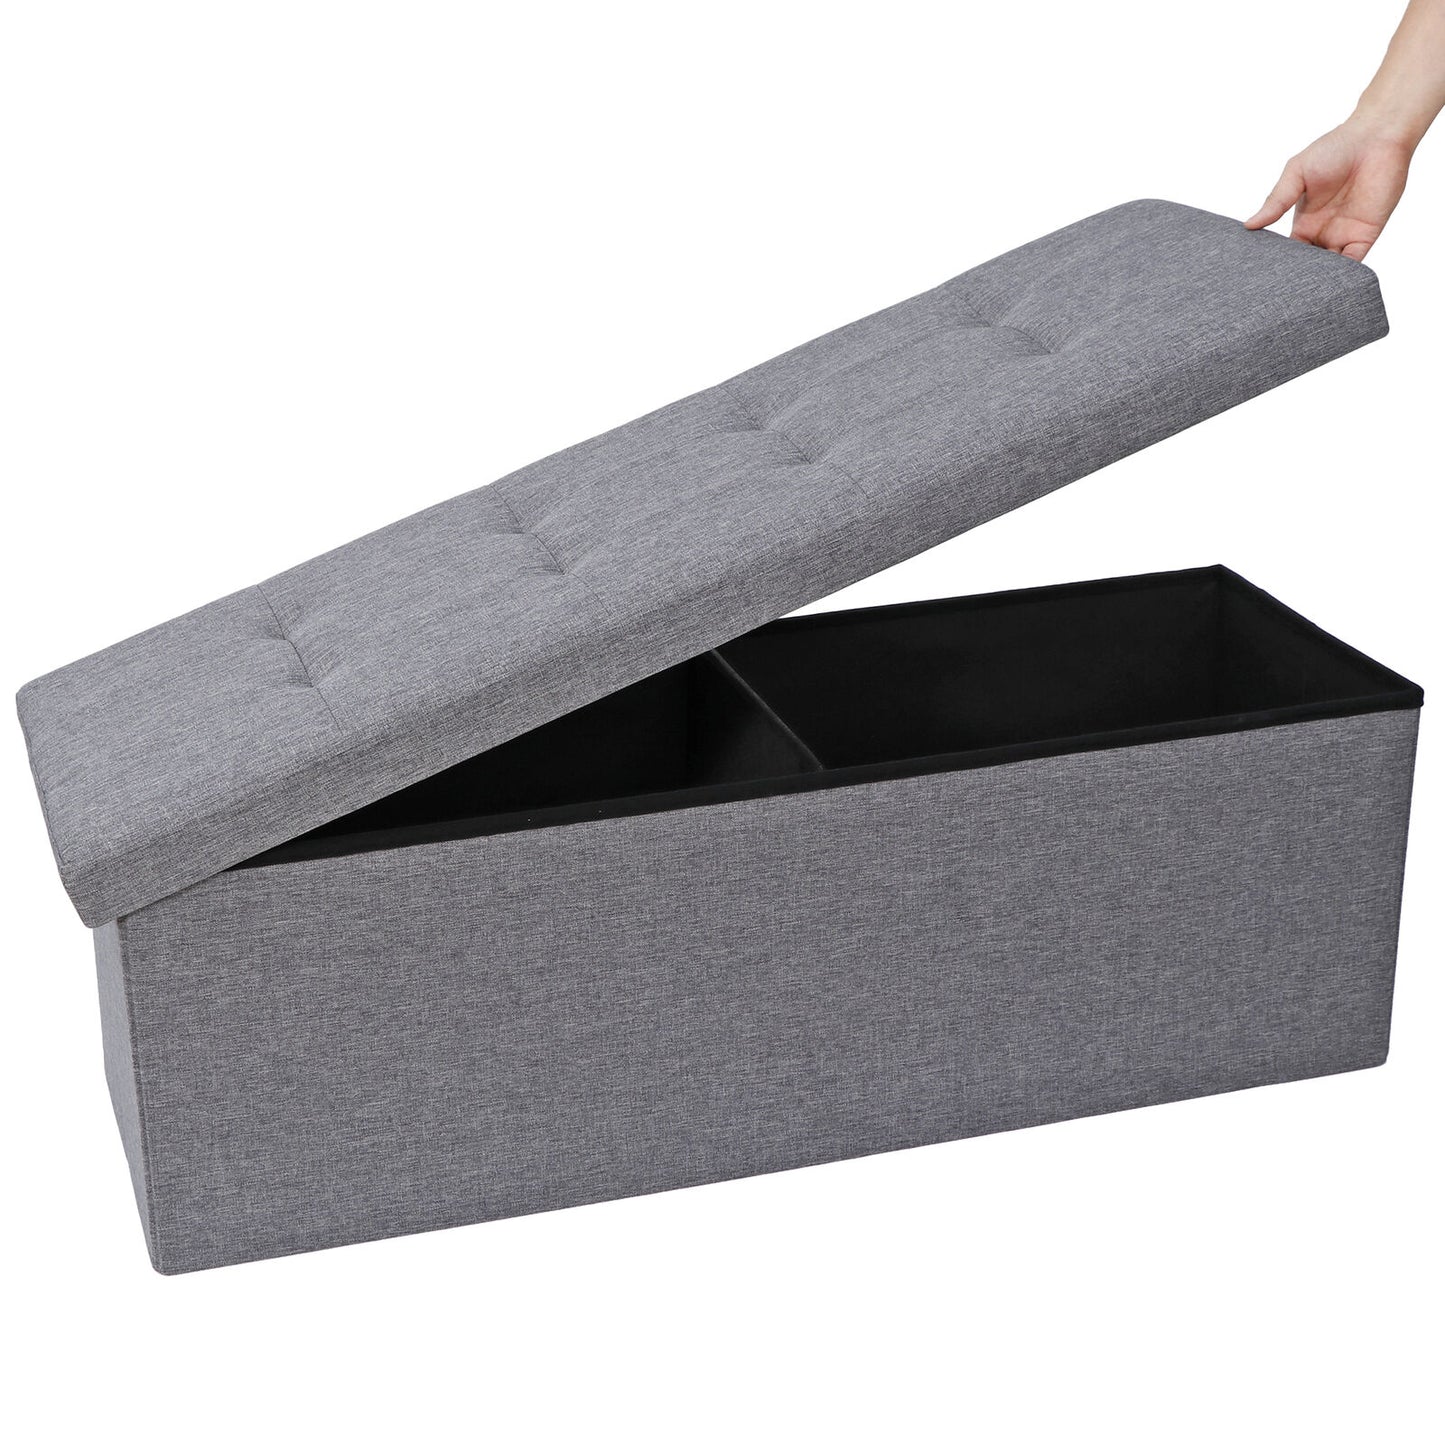 43"Folding Storage Fabric Ottoman Bench Chest Box Footrest Stools W/Wood Divier